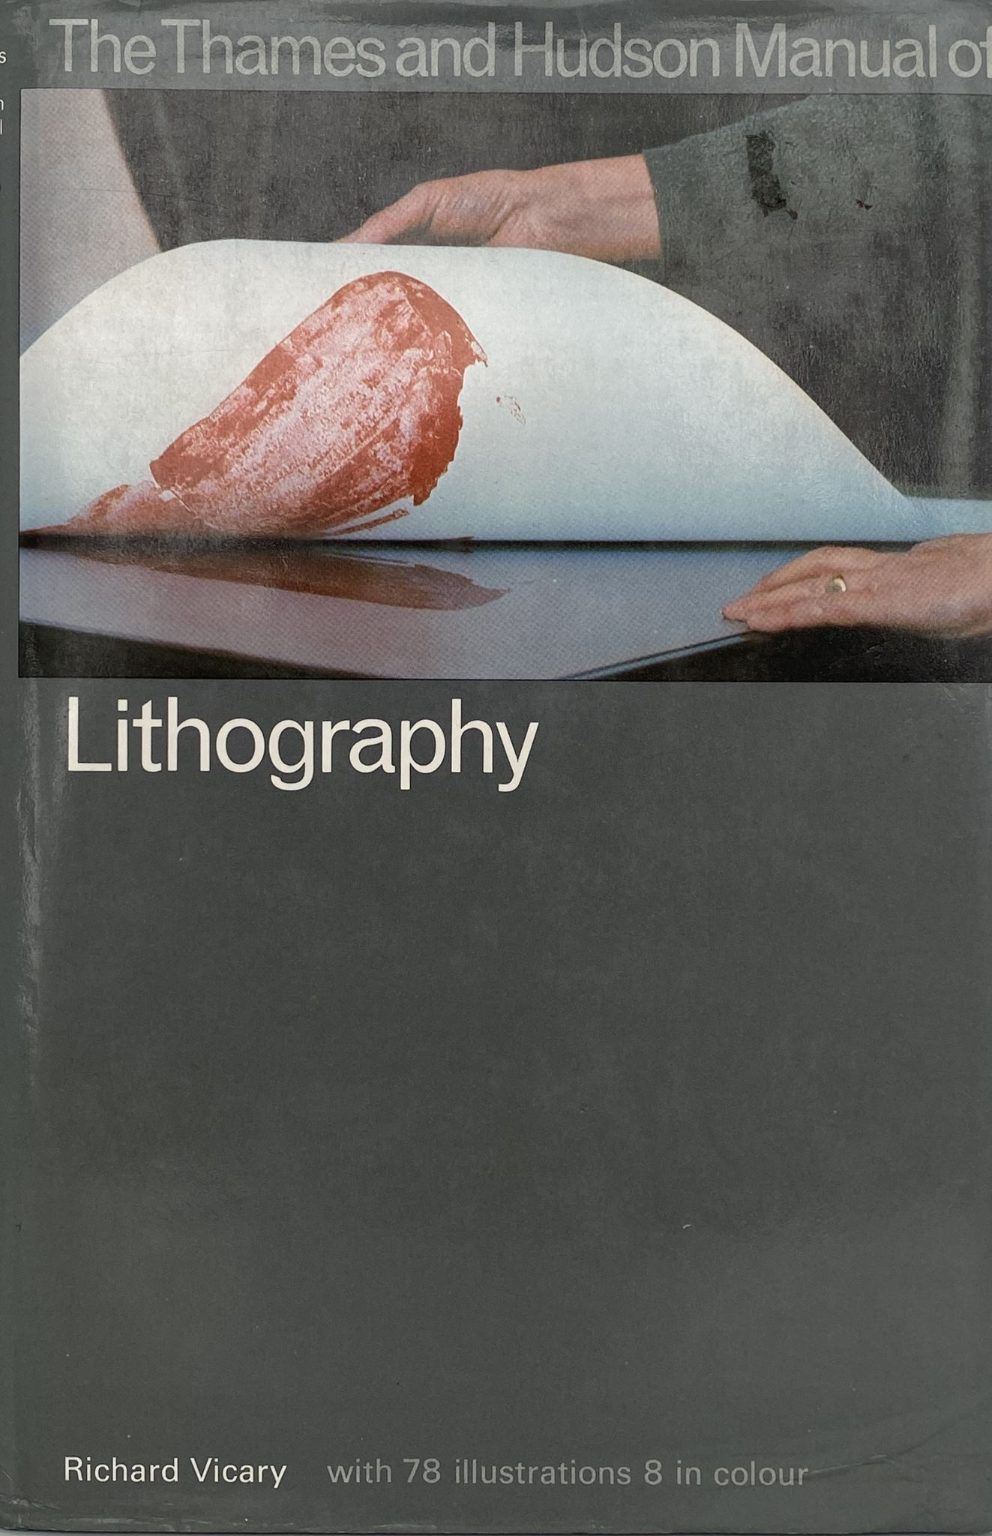 MANUAL OF LITHOGRAPHY